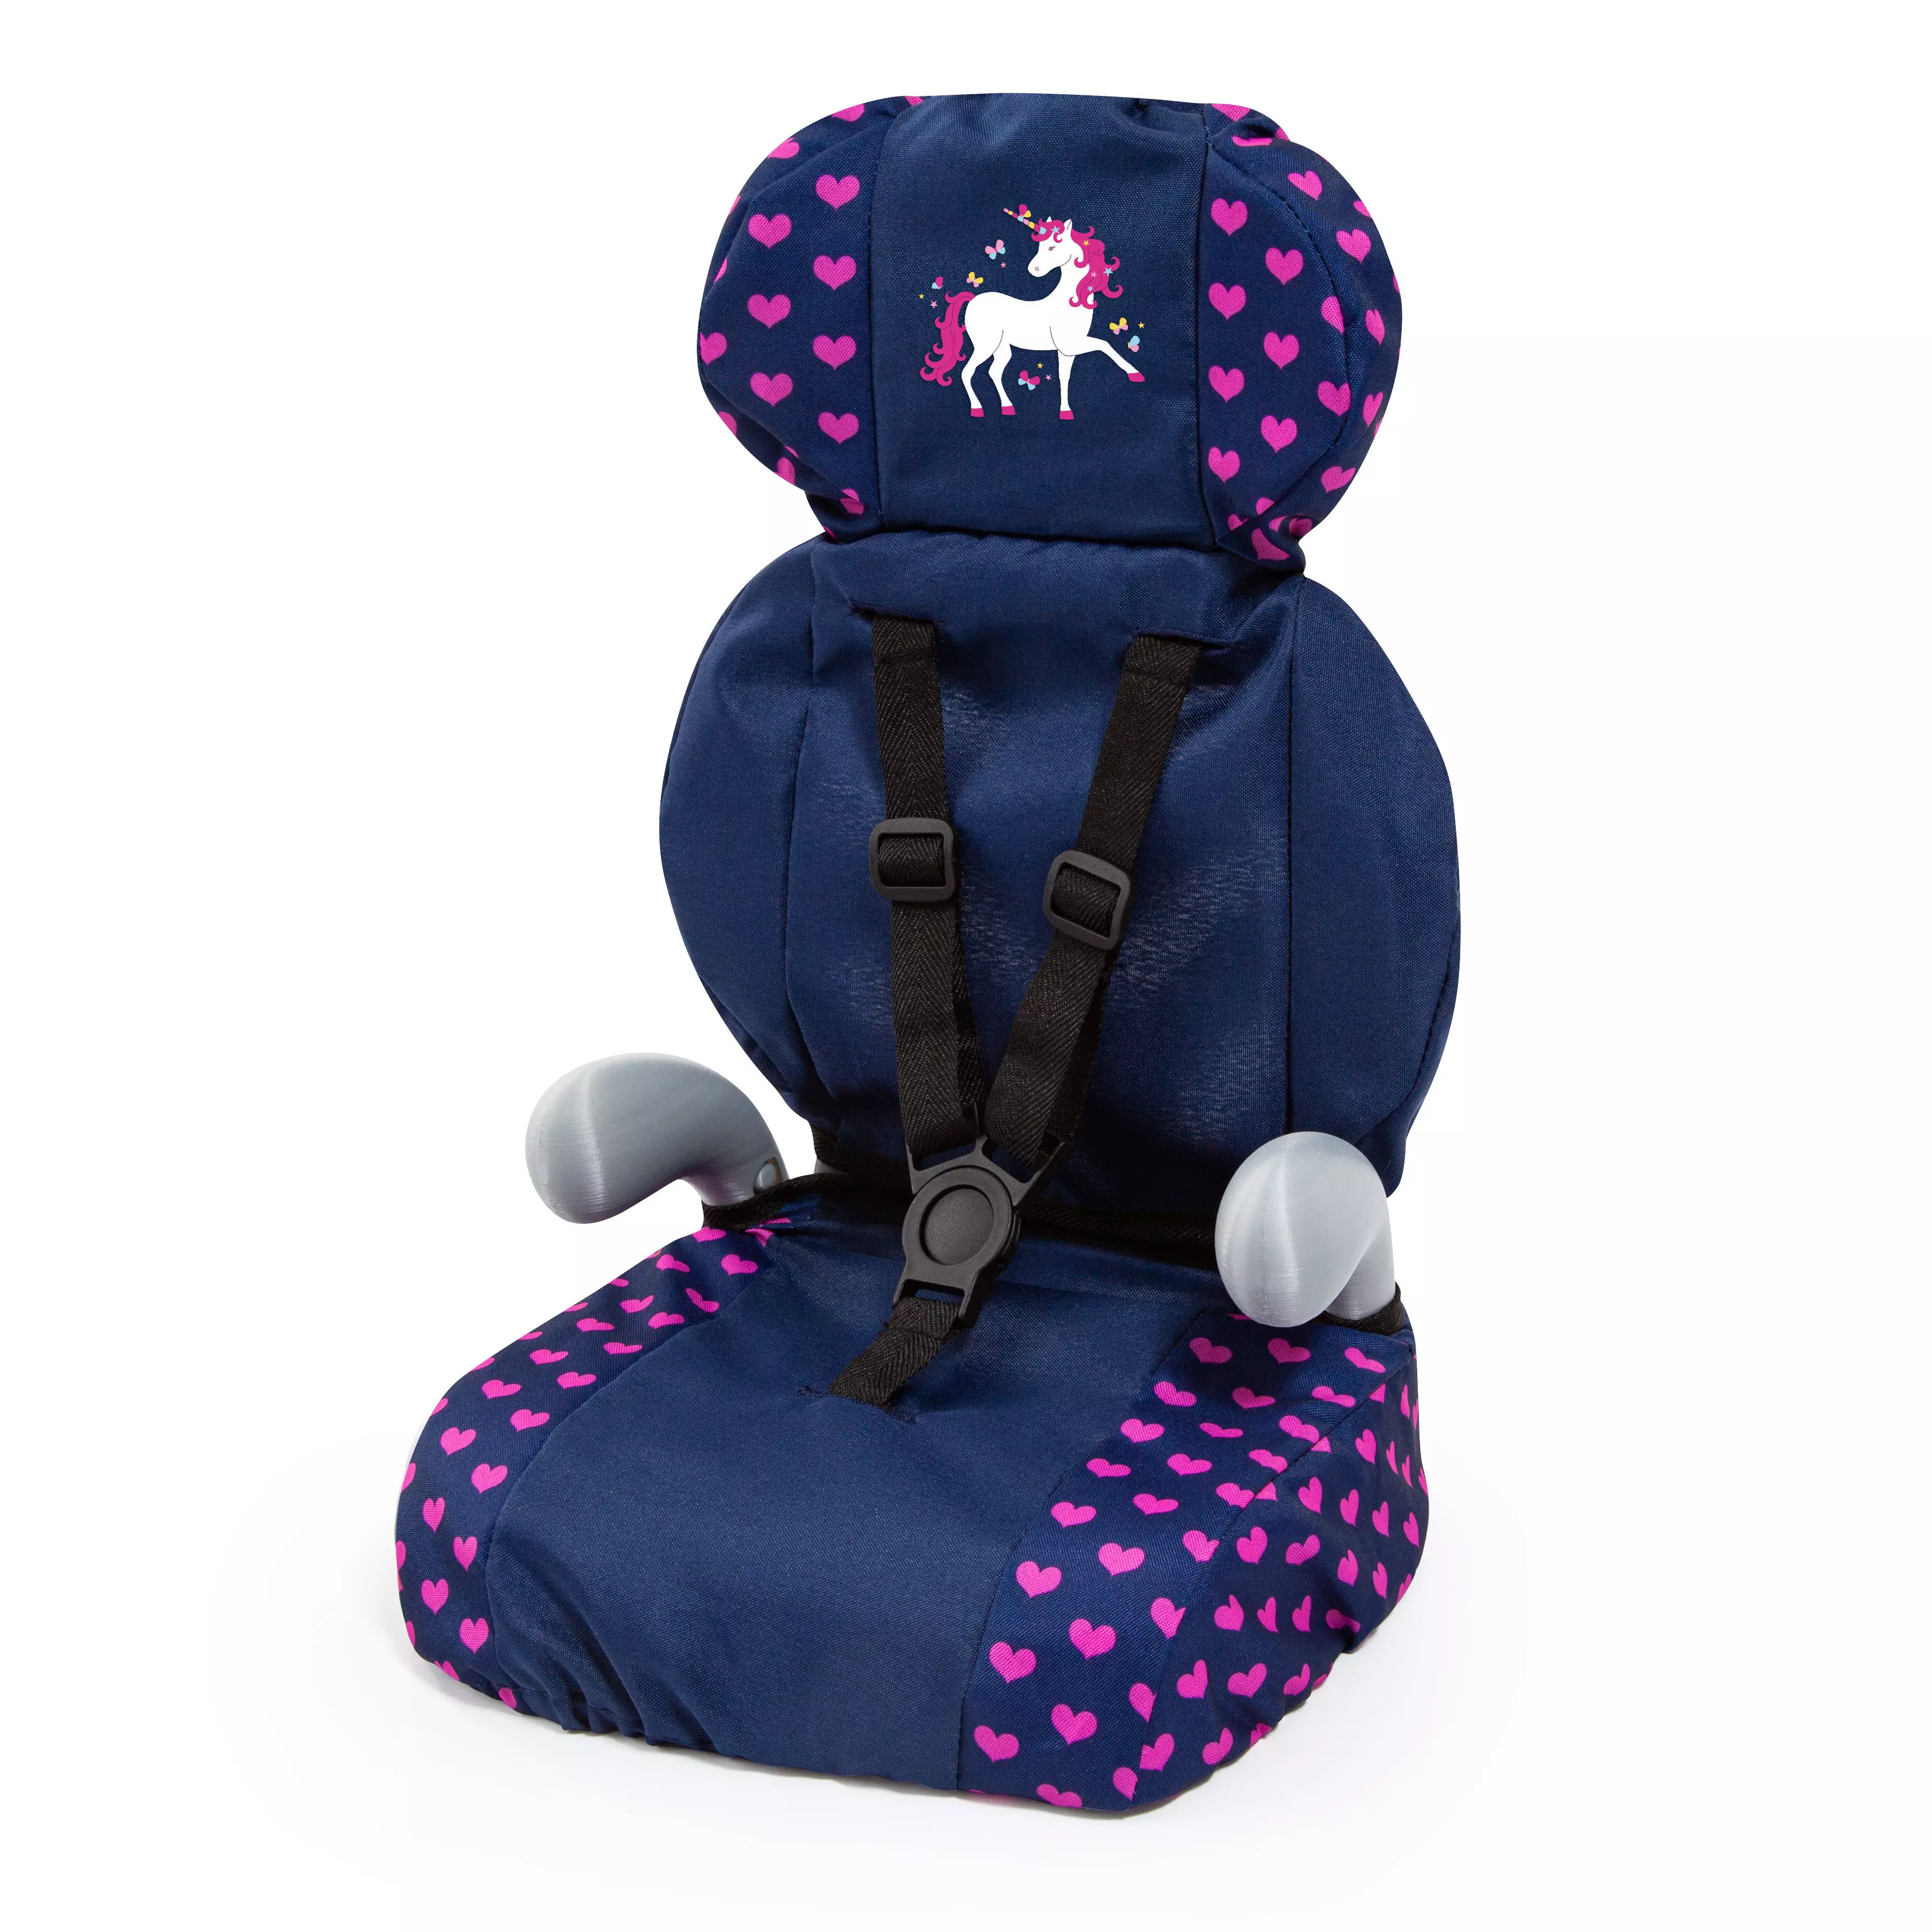 Bayer Deluxe Car Seat Navy 67554Aa